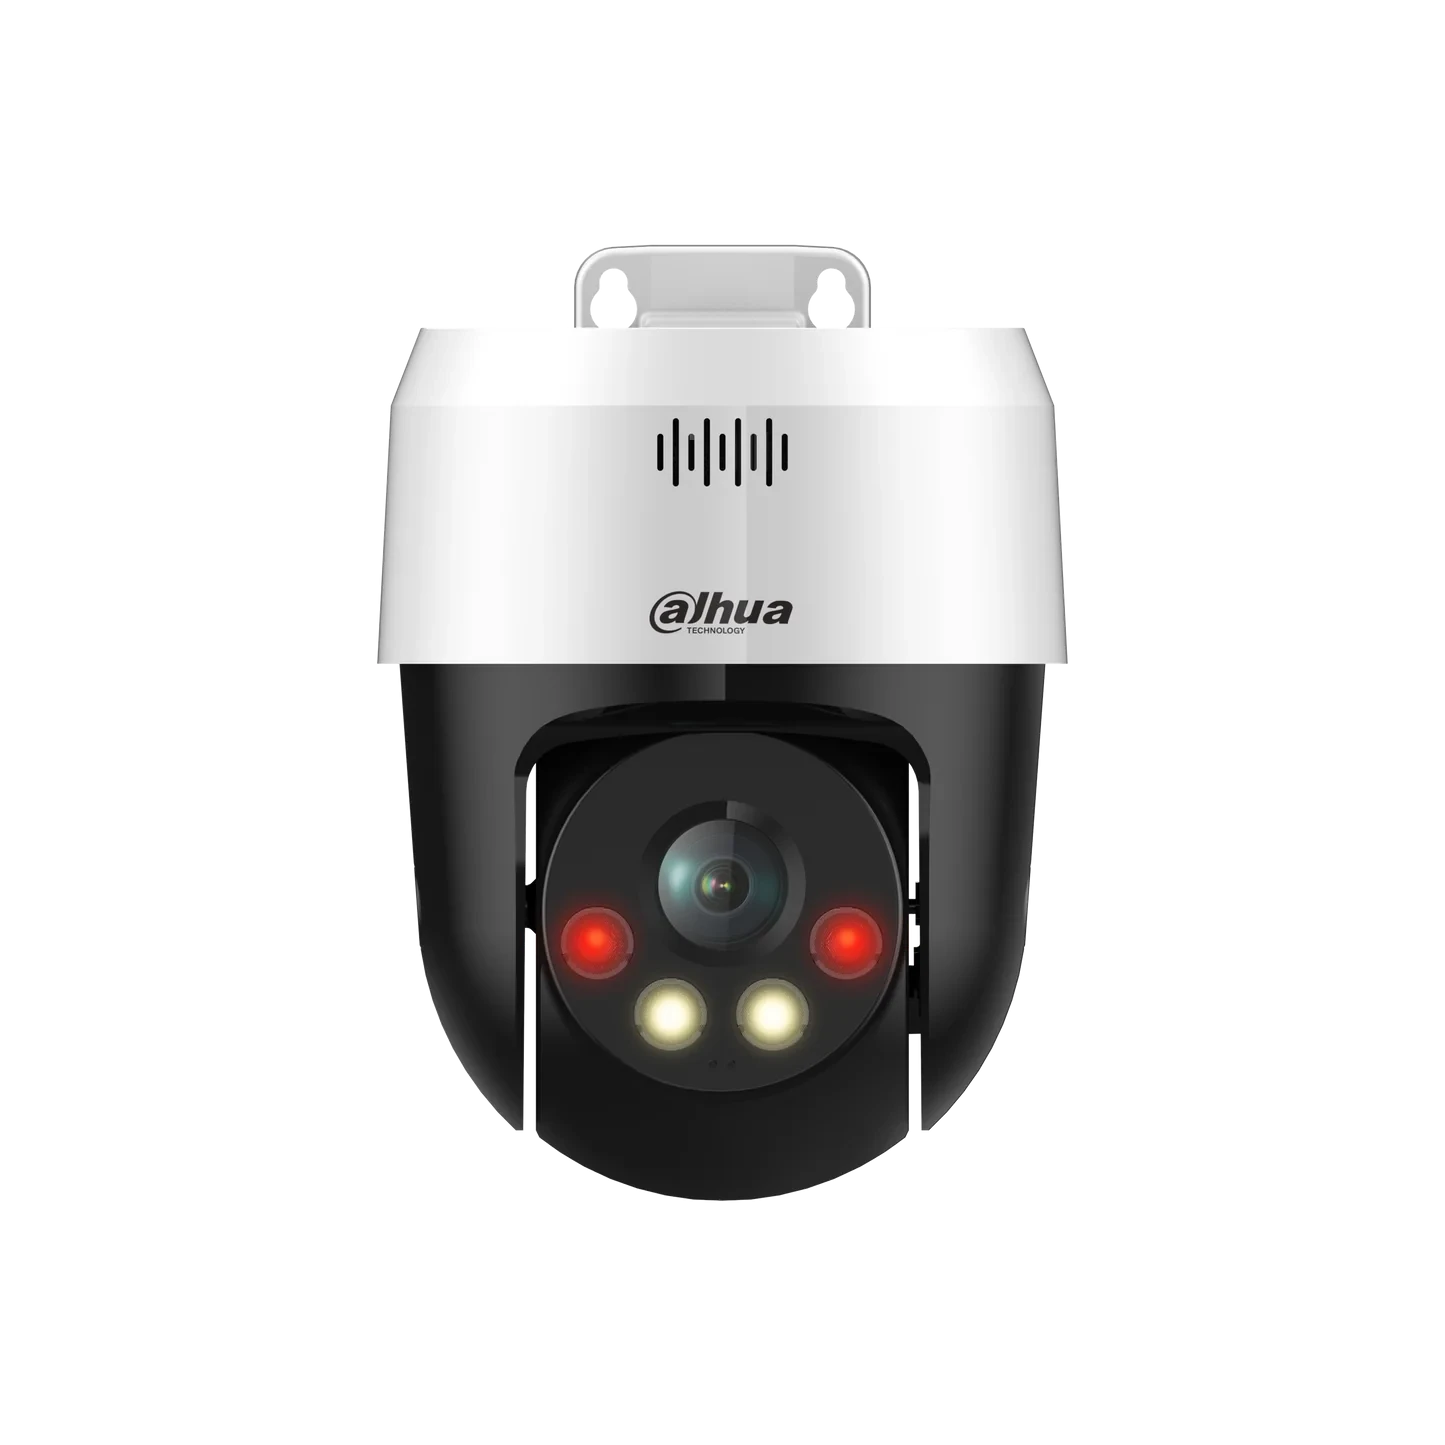 Dahua SD2A200HB-GN-A-PV-S2 2MP Full-Color Network PTZ Camera